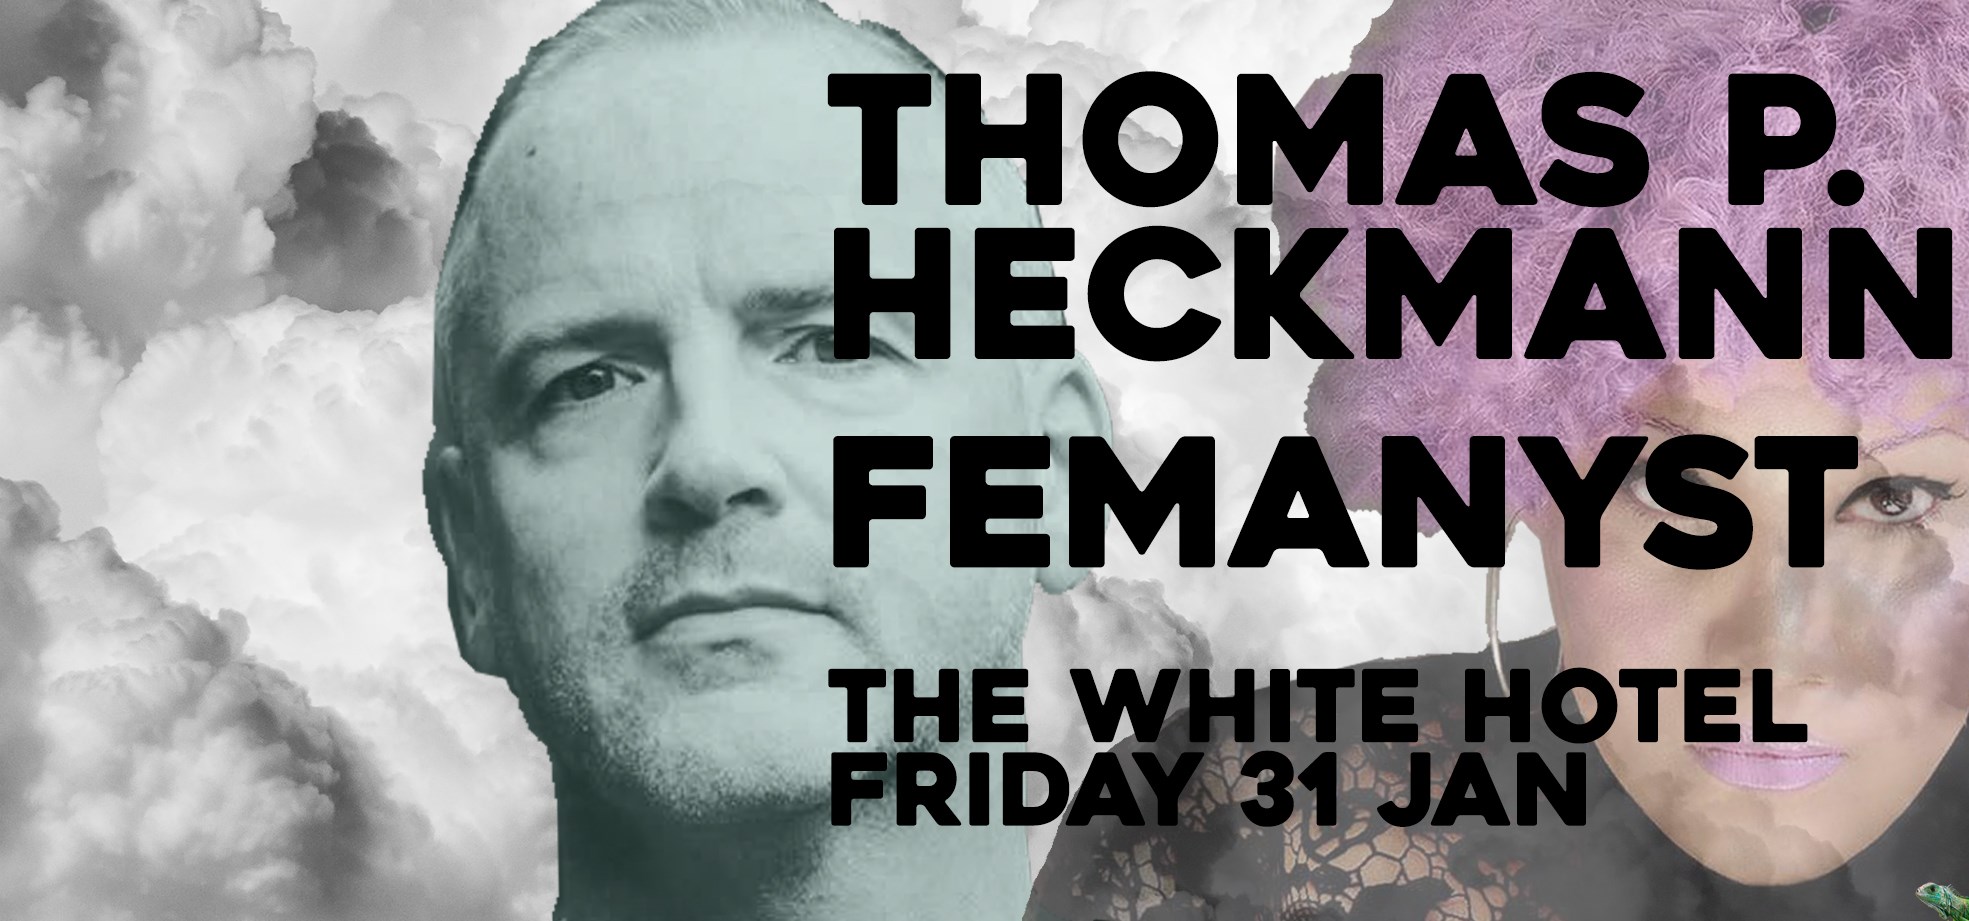 Meat Free presents Thomas P Heckmann and Femanyst